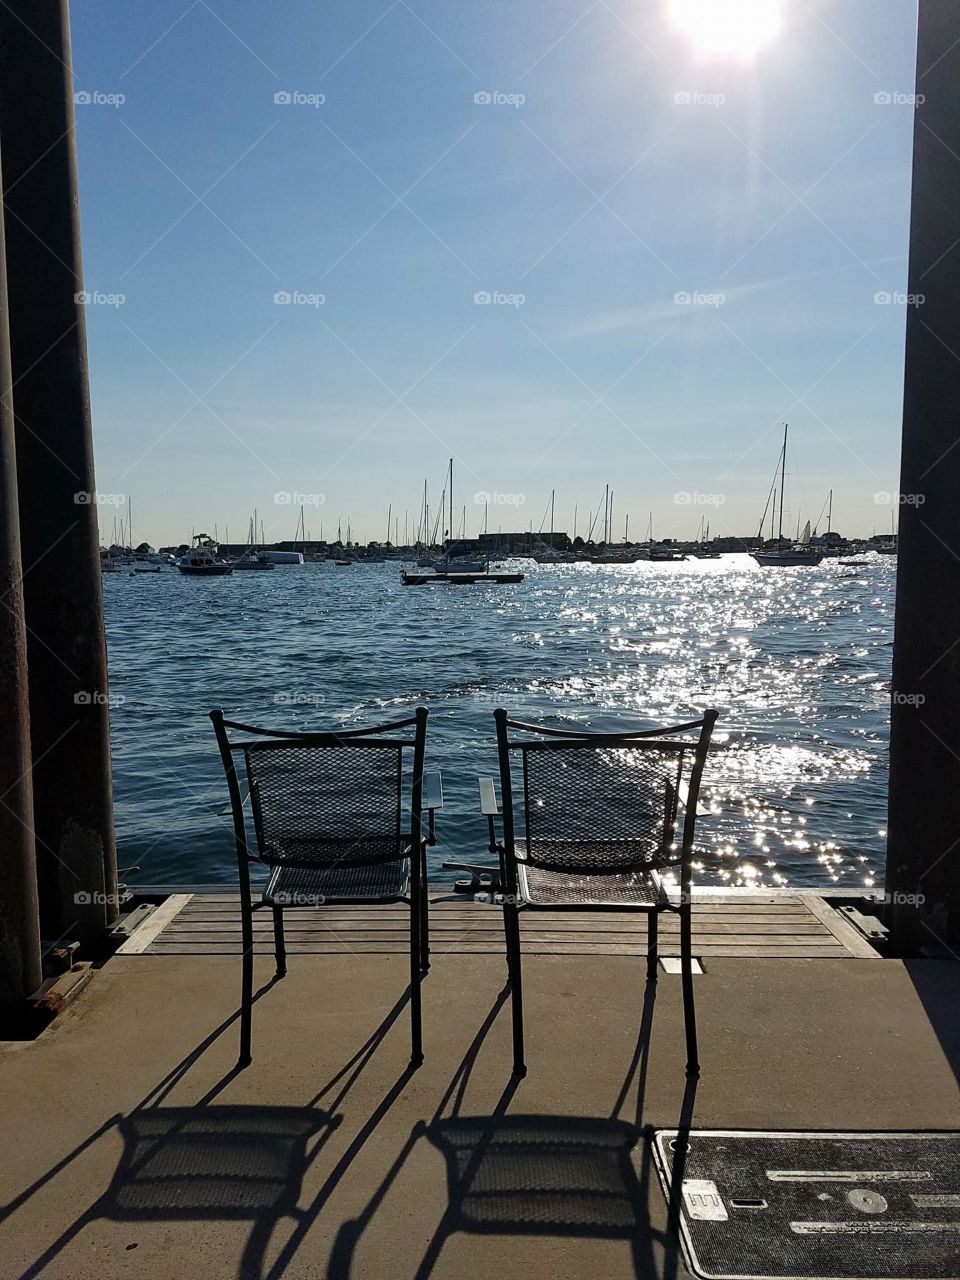 Chairs on a Pier